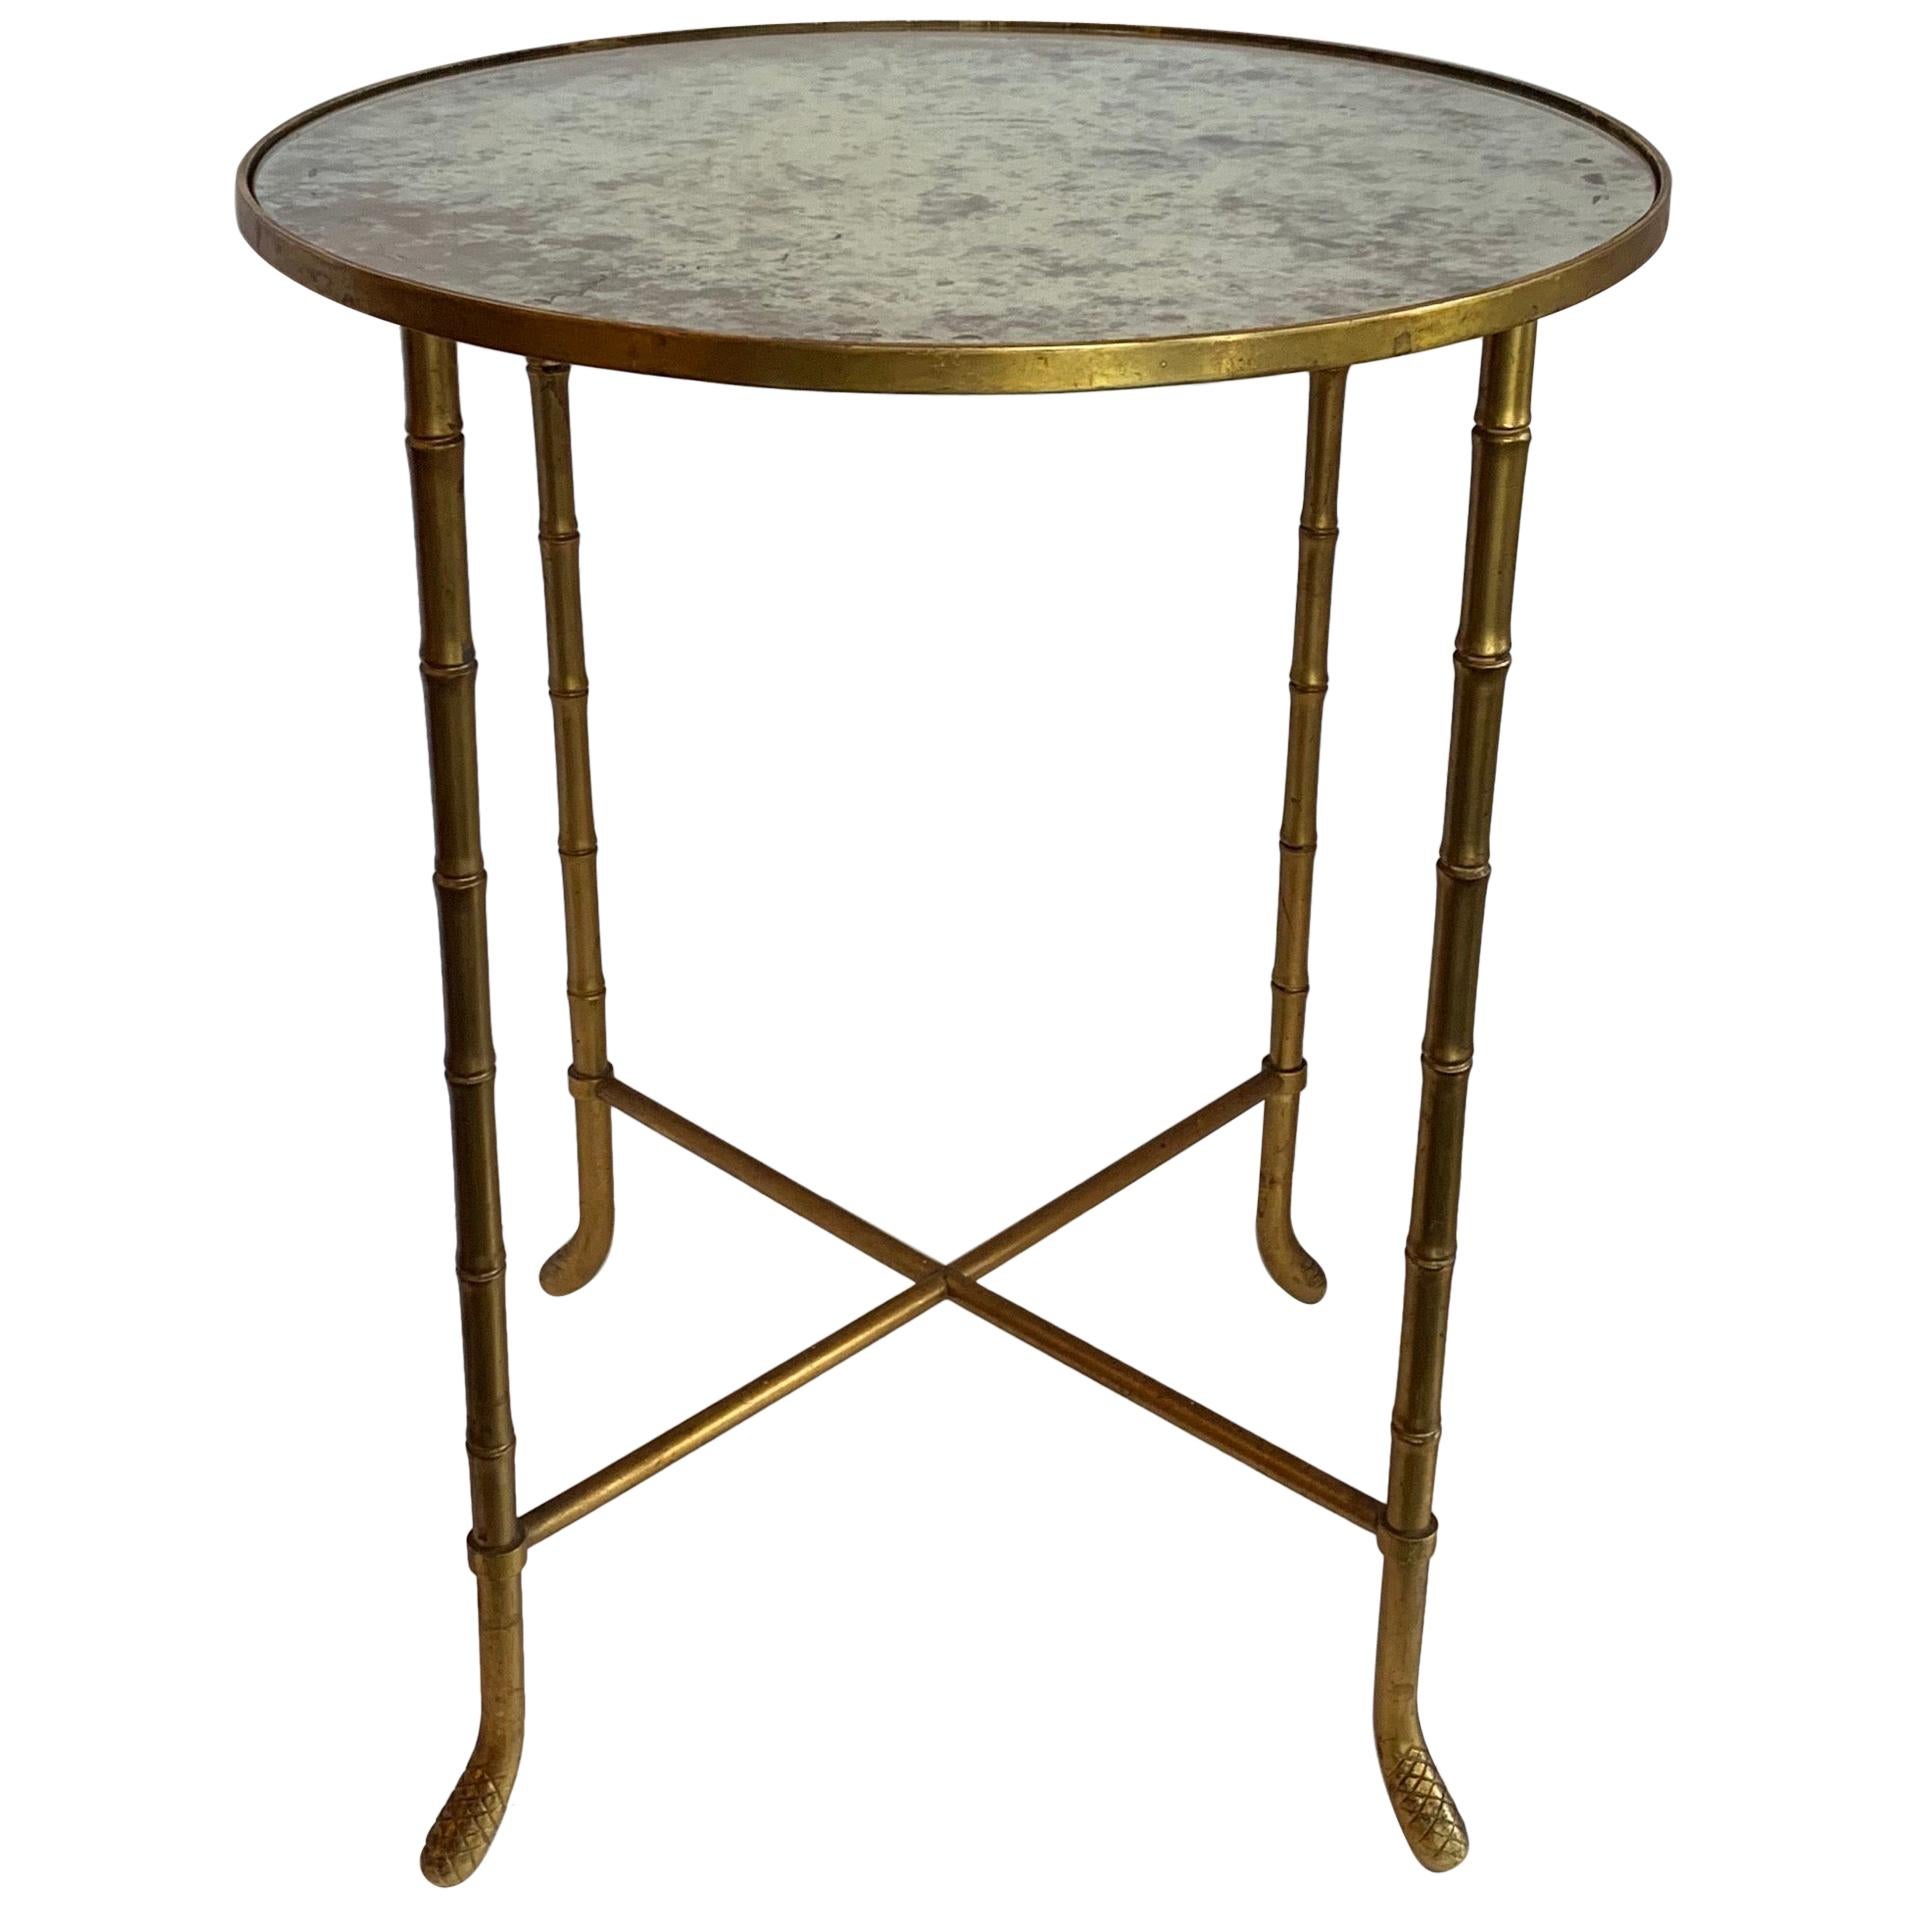 Wonderful Pair Vintage Bagues Mirrored Top Gold Gilt Brass Bamboo Side Tables